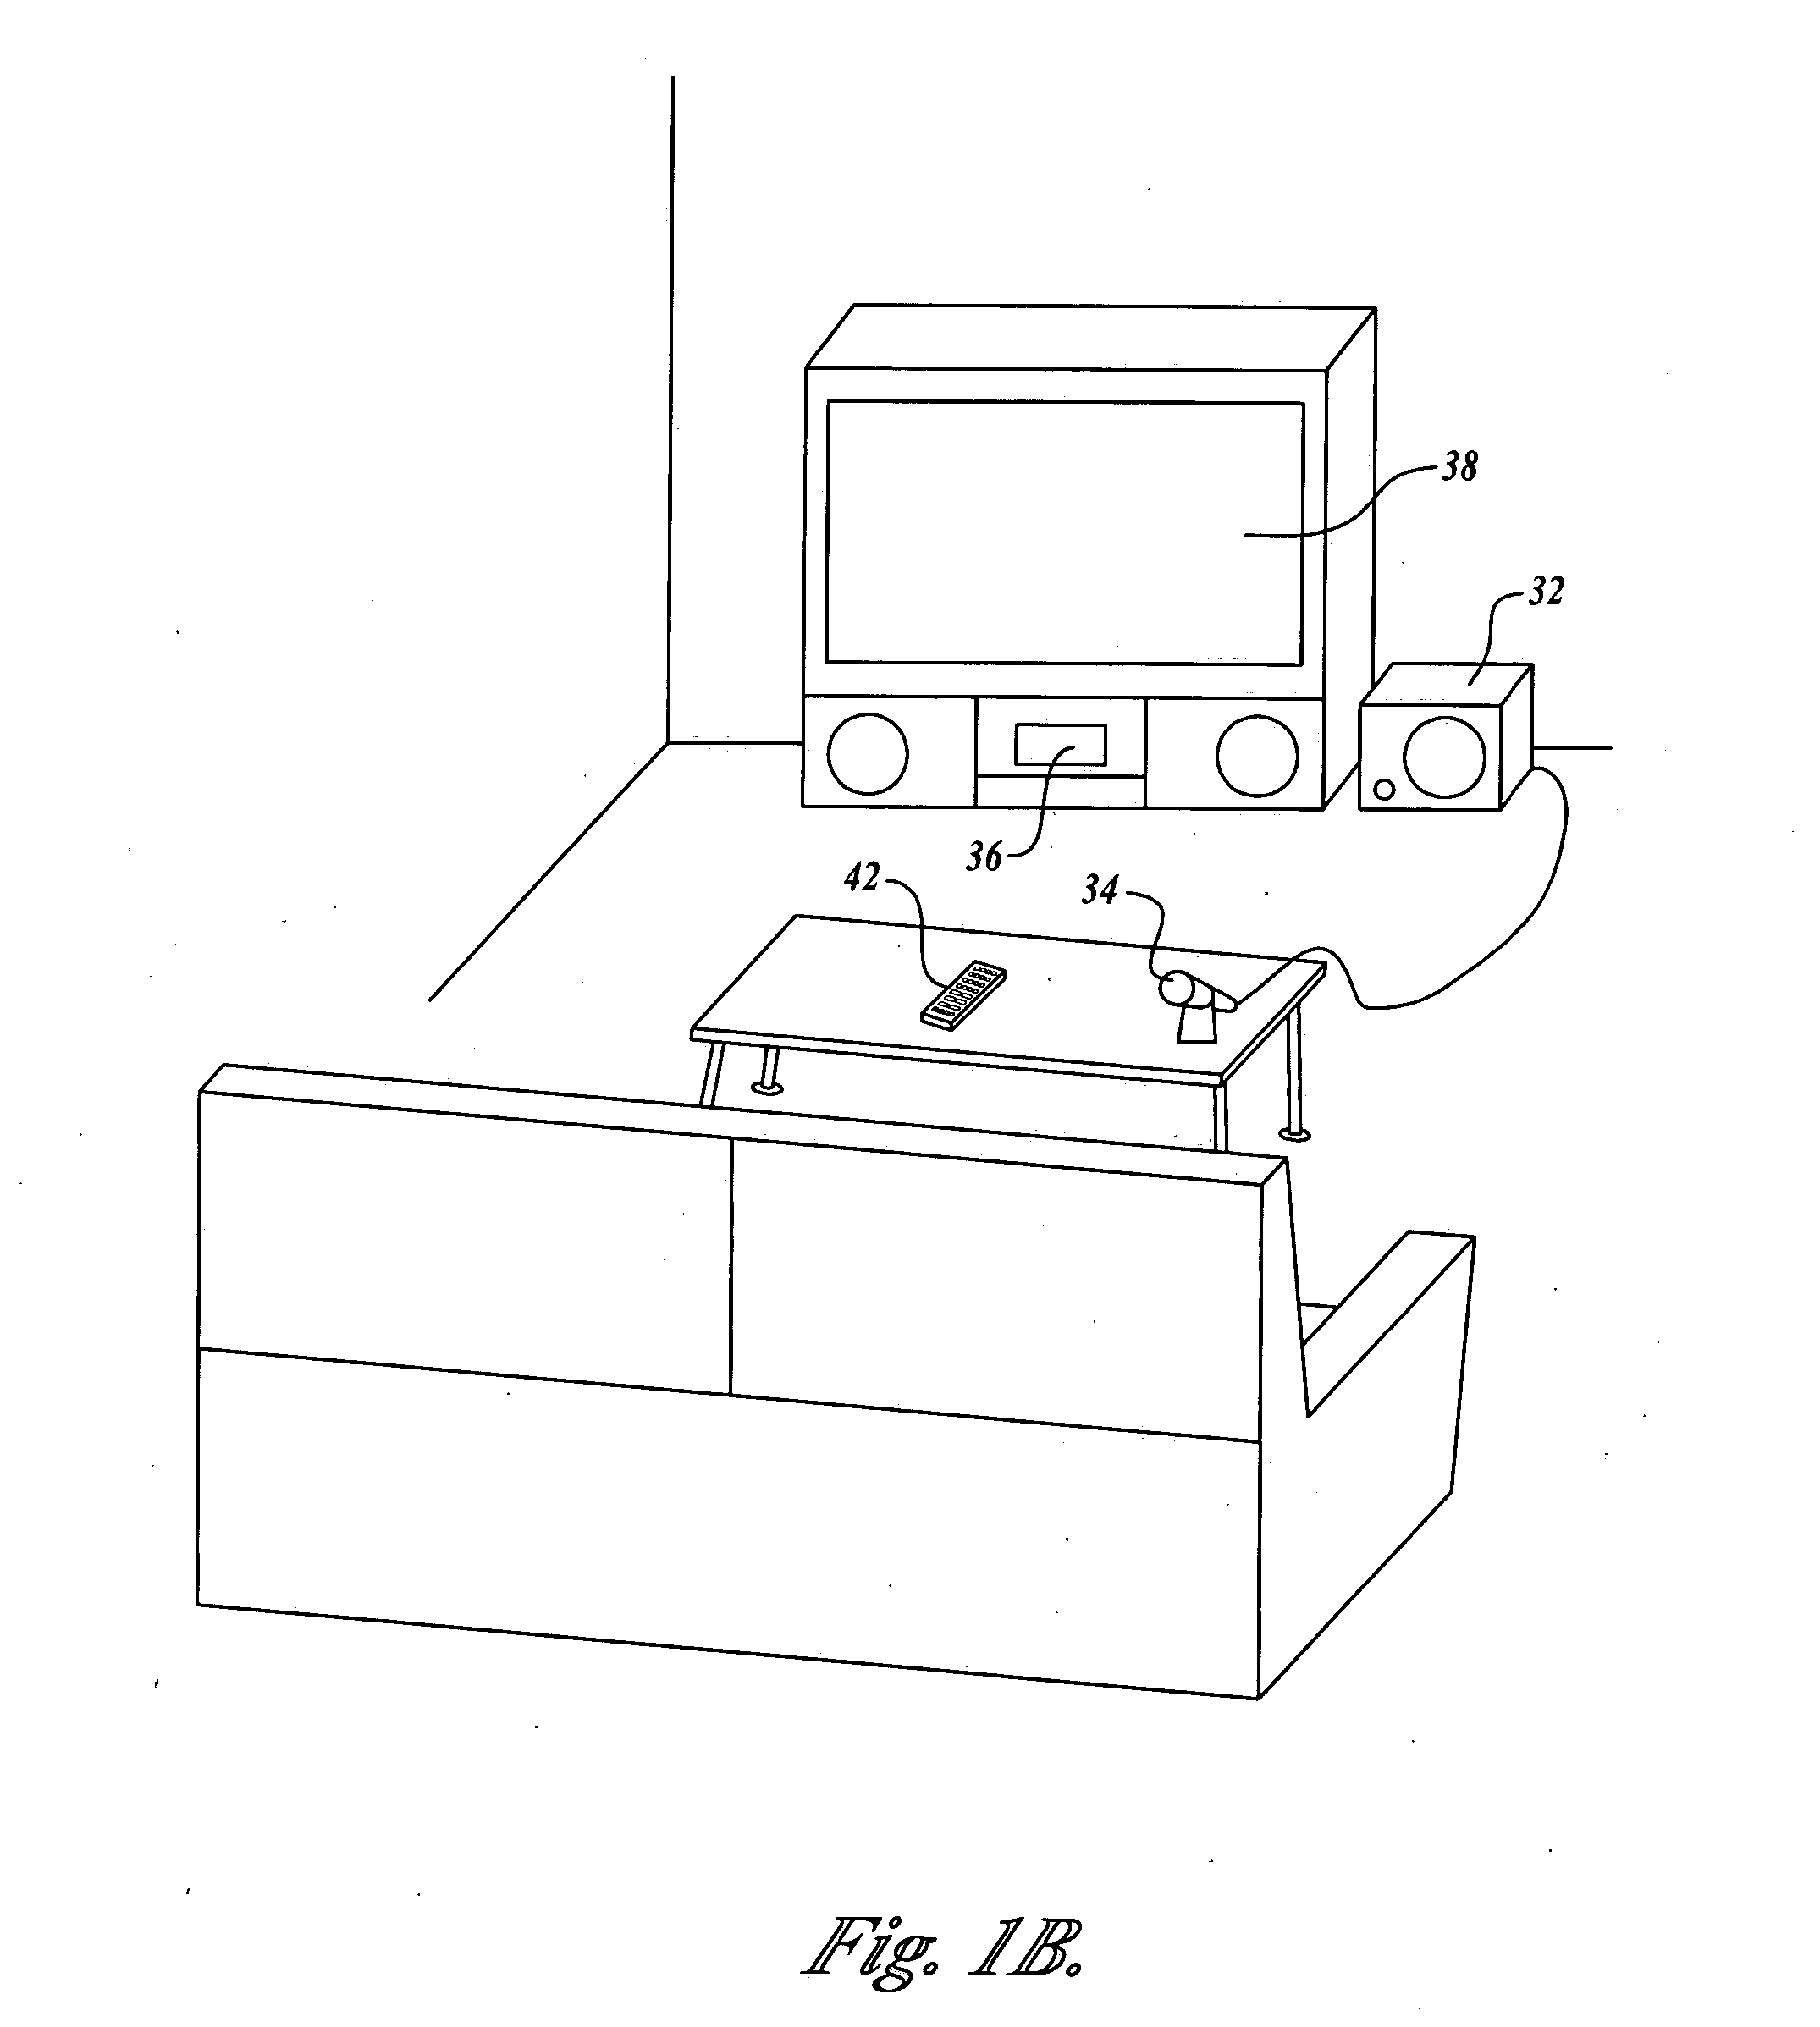 Adjustable speaker systems and methods